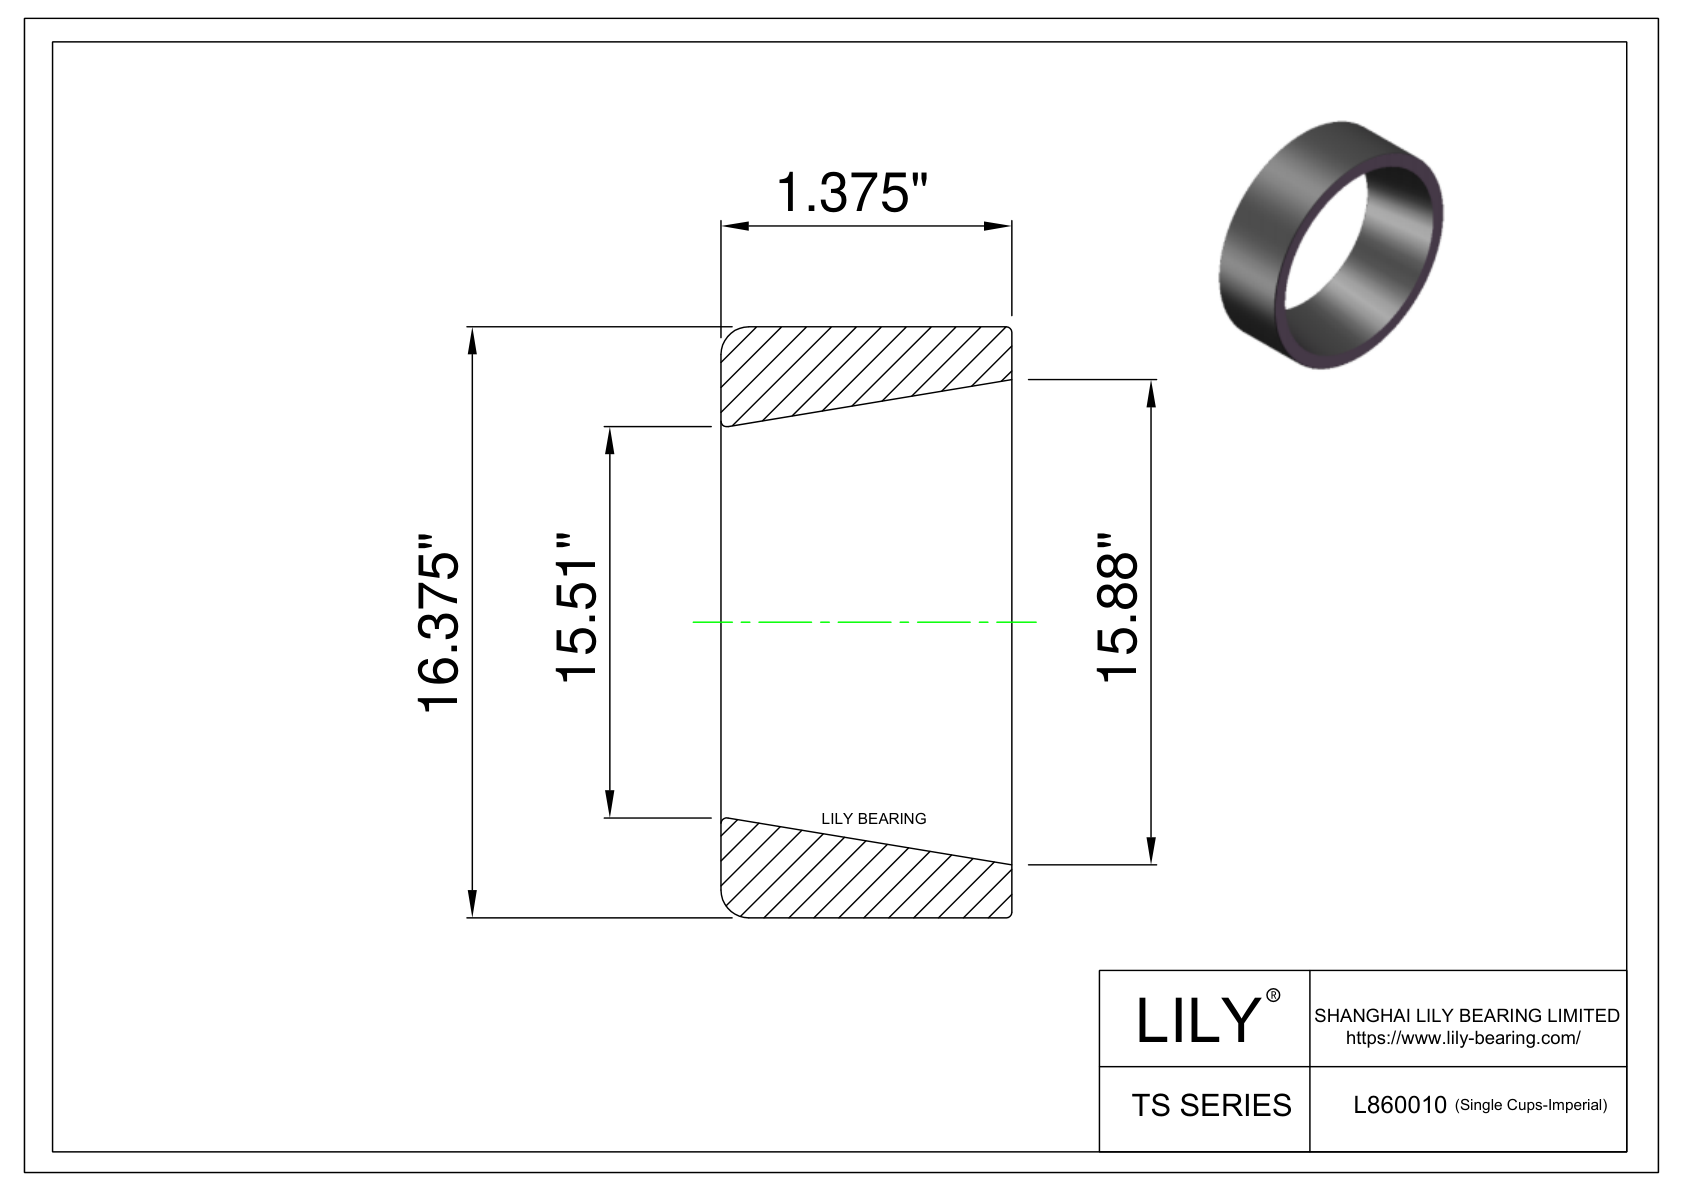 L860010 Single Cups (Imperial) cad drawing